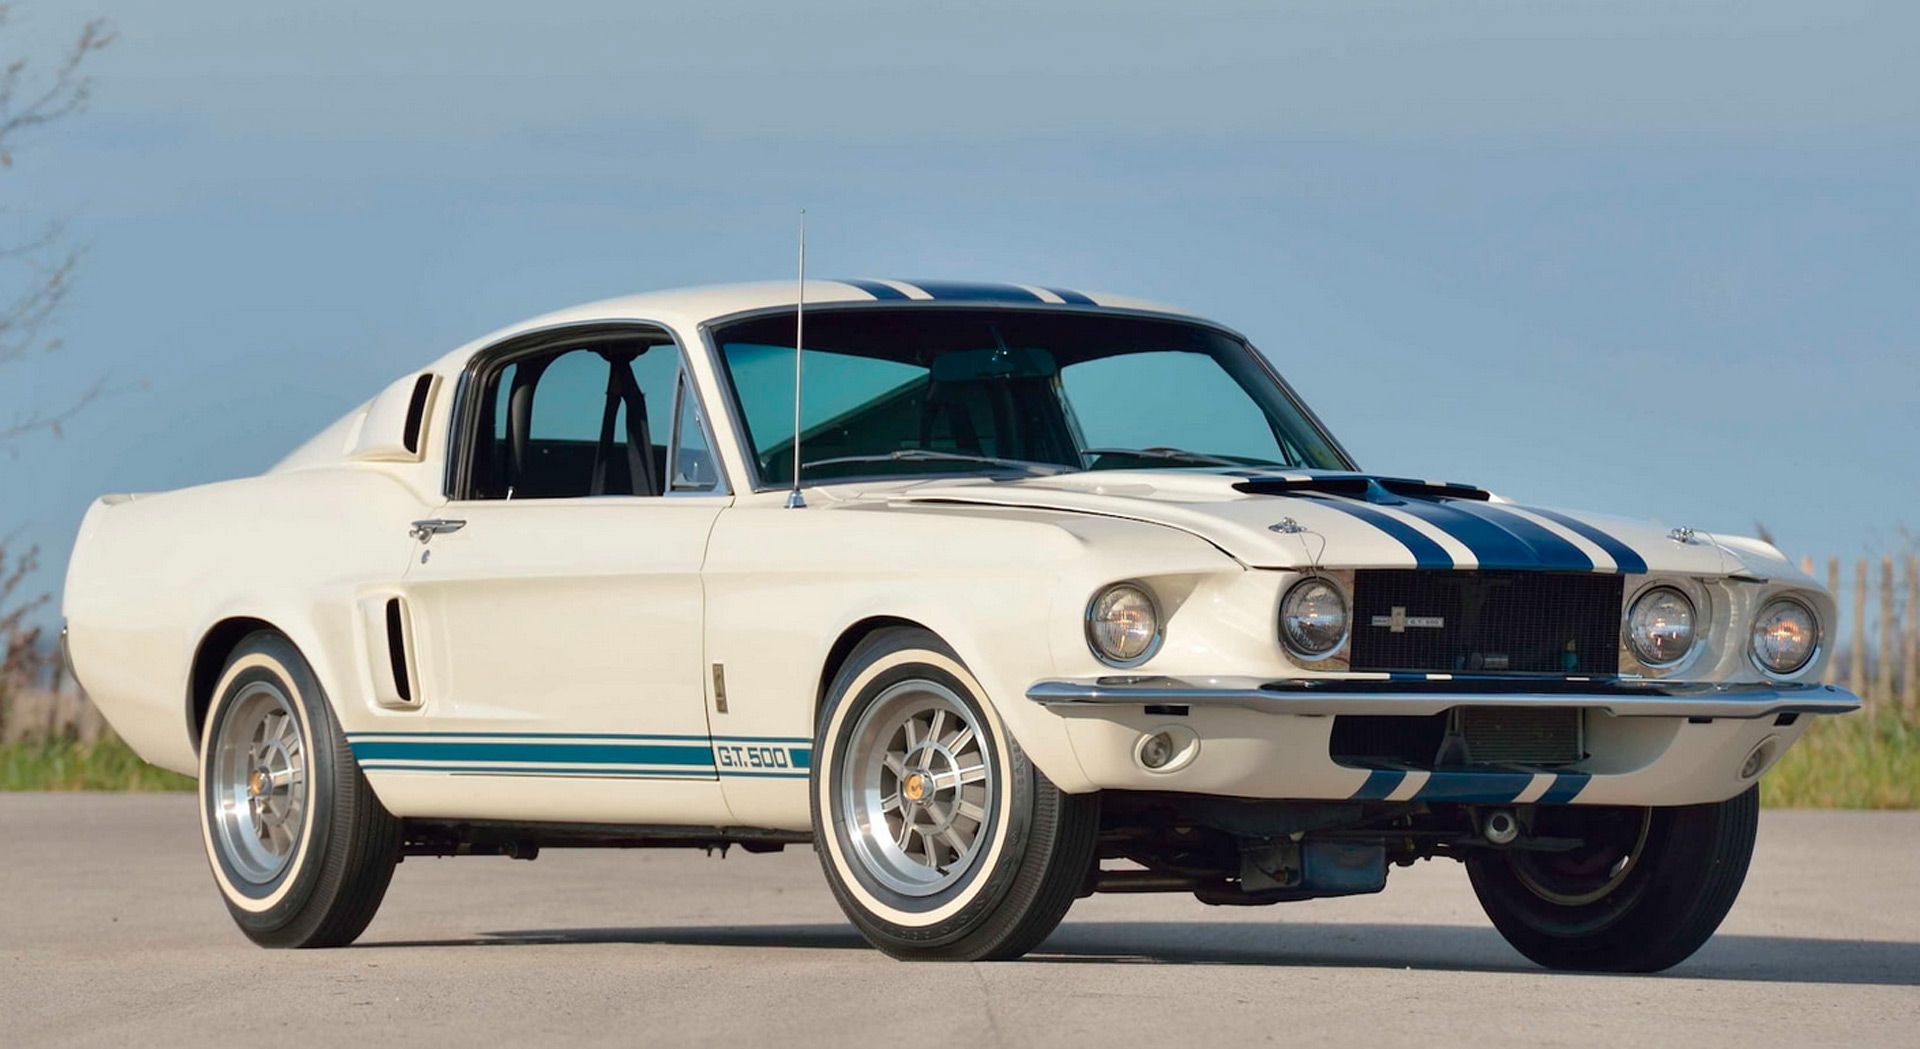 1967 Ford Mustang Shelby GT500: The muscle car like no other in the world.